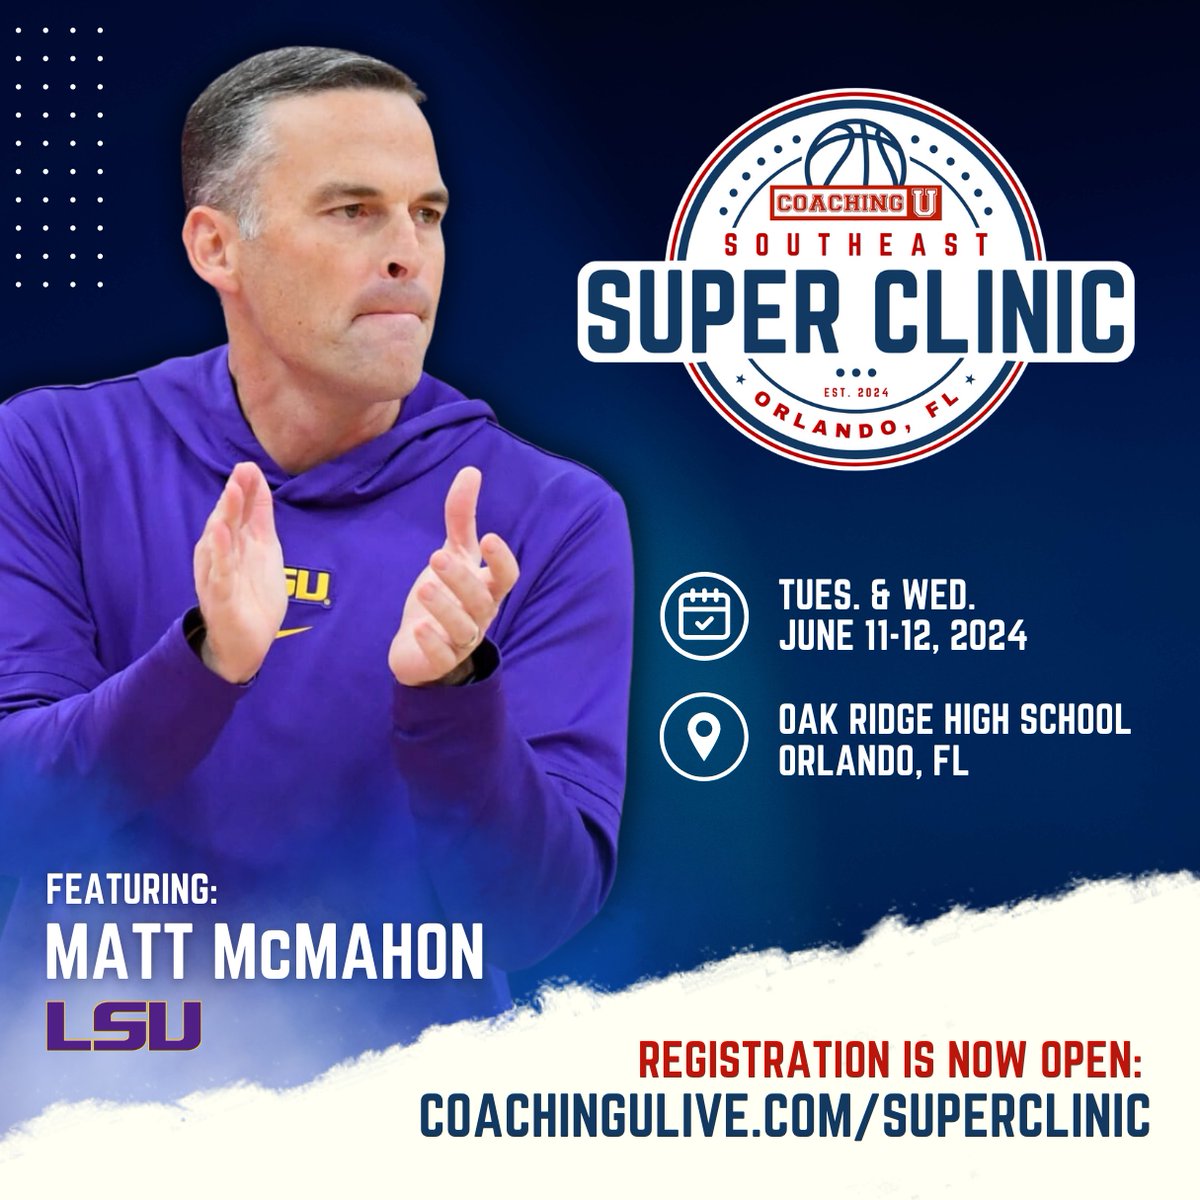 🏀 Coaching U returns to Orlando this summer for the 1st ever Southeast Super Clinic featuring LSU's Matt McMahon! 🗓️ June 11-12, 2024 📍 Orlando, FL 🎟️ Registration is now open: 🔗 coachingulive.com/superclinic